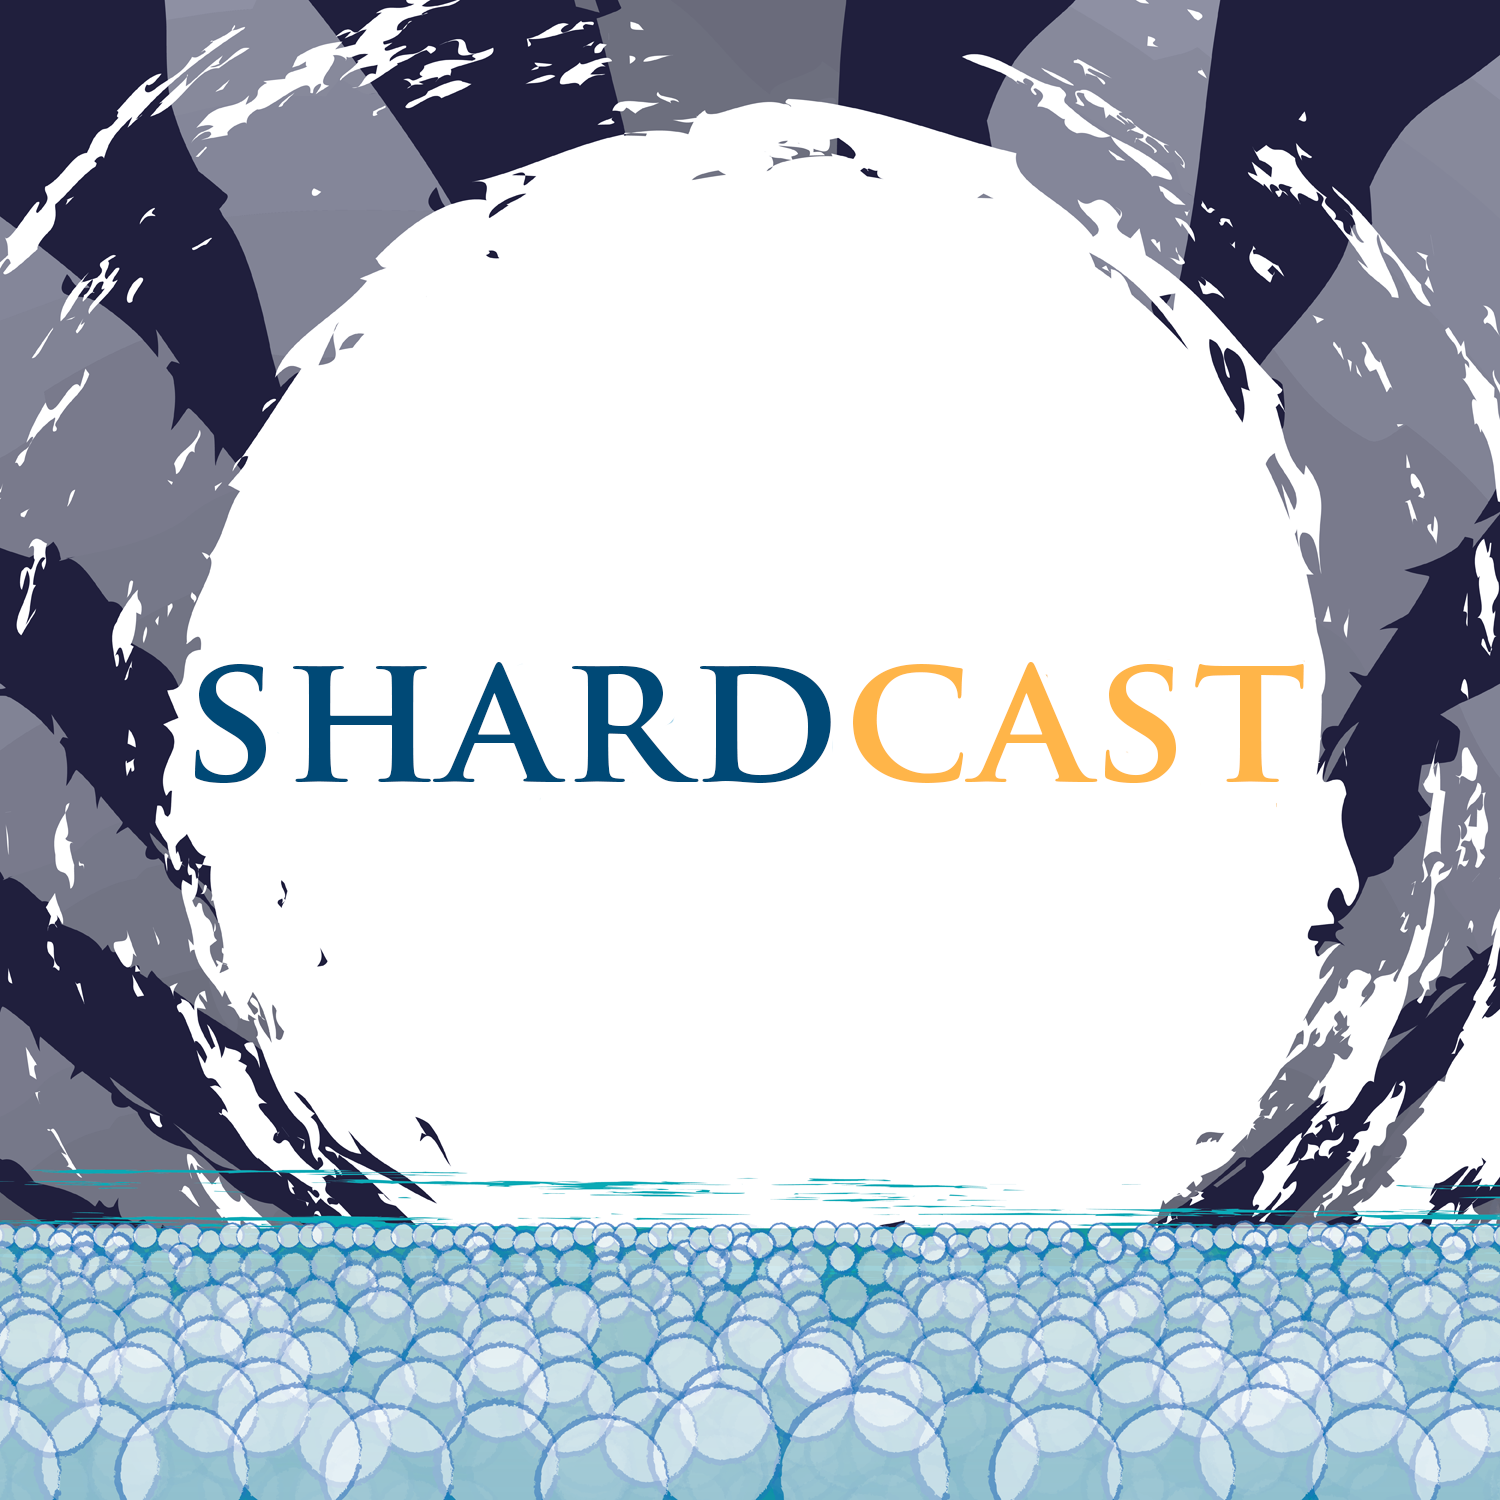 More information about "Shardcast: Cosmere Adaptation Discussion!"